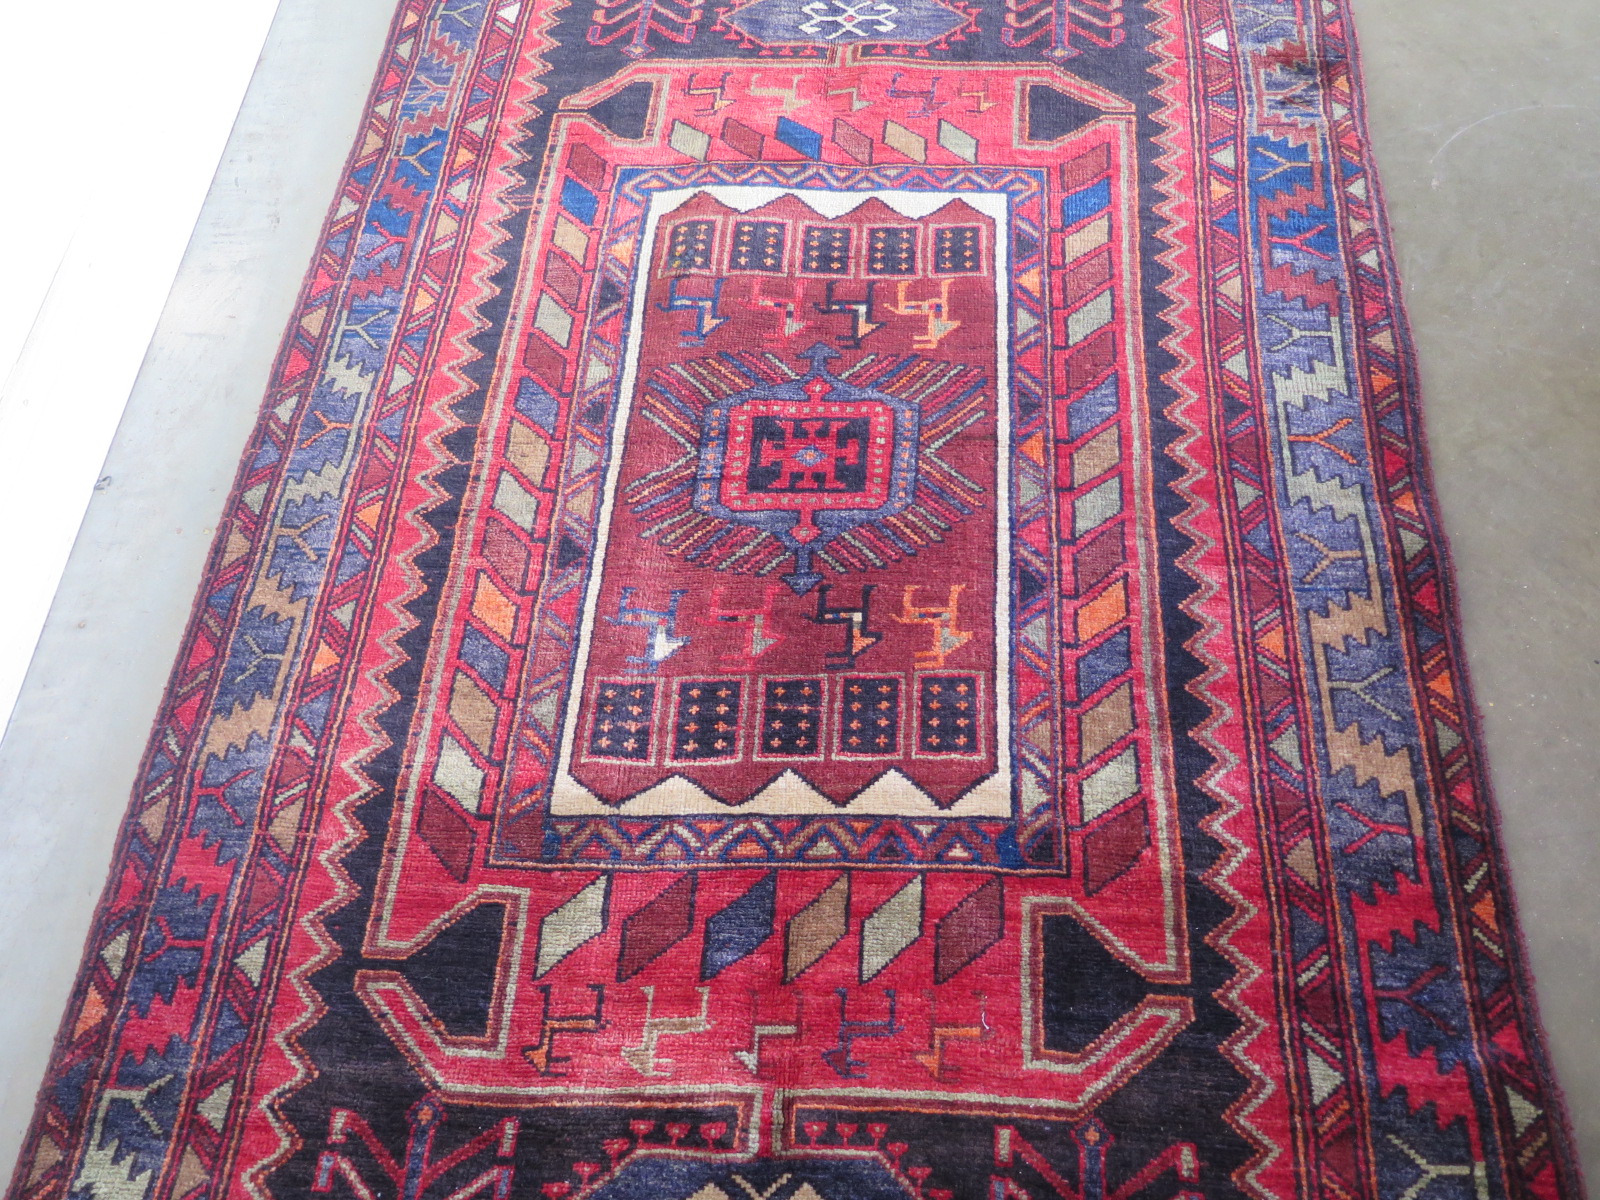 A hand knotted woollen Hamadan rug - 3.23m x 1.22m - Image 2 of 3